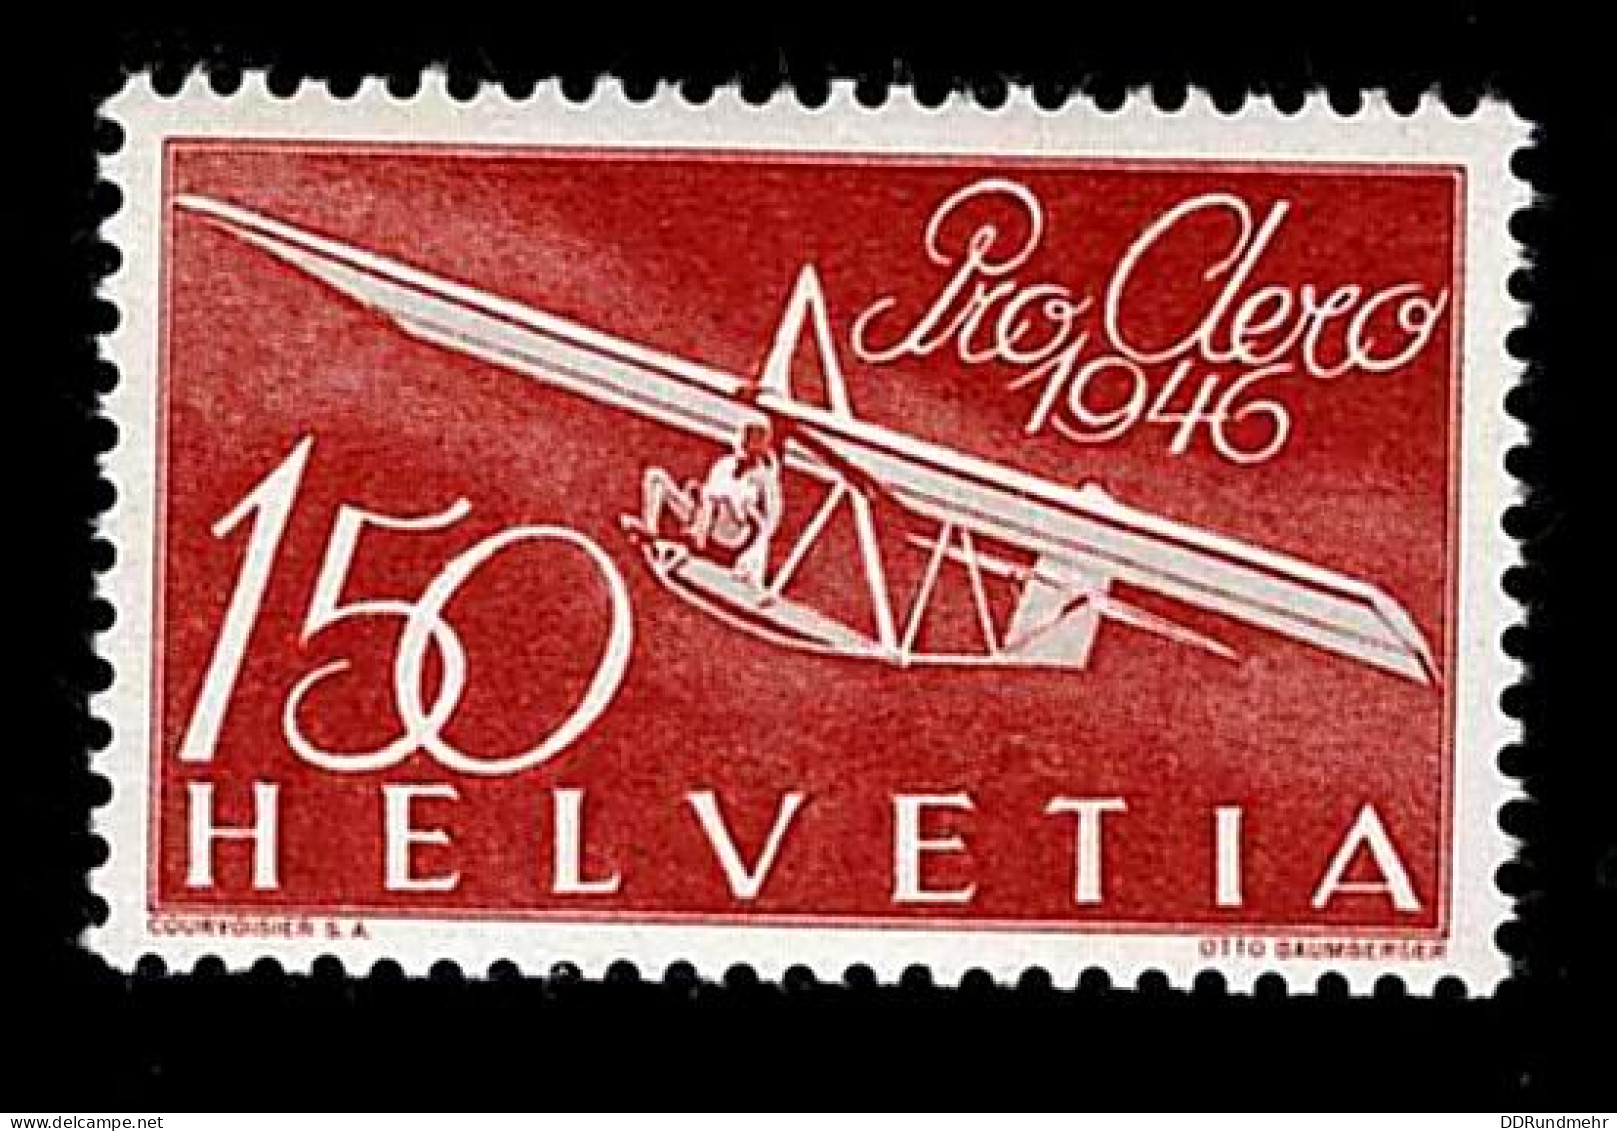 1946 Pro Aero  Michel CH 470 Stamp Number CH C41 Yvert Et Tellier CH PA40 Stanley Gibbons CH 466 Unificato CH A40 Xx MNH - Nuovi